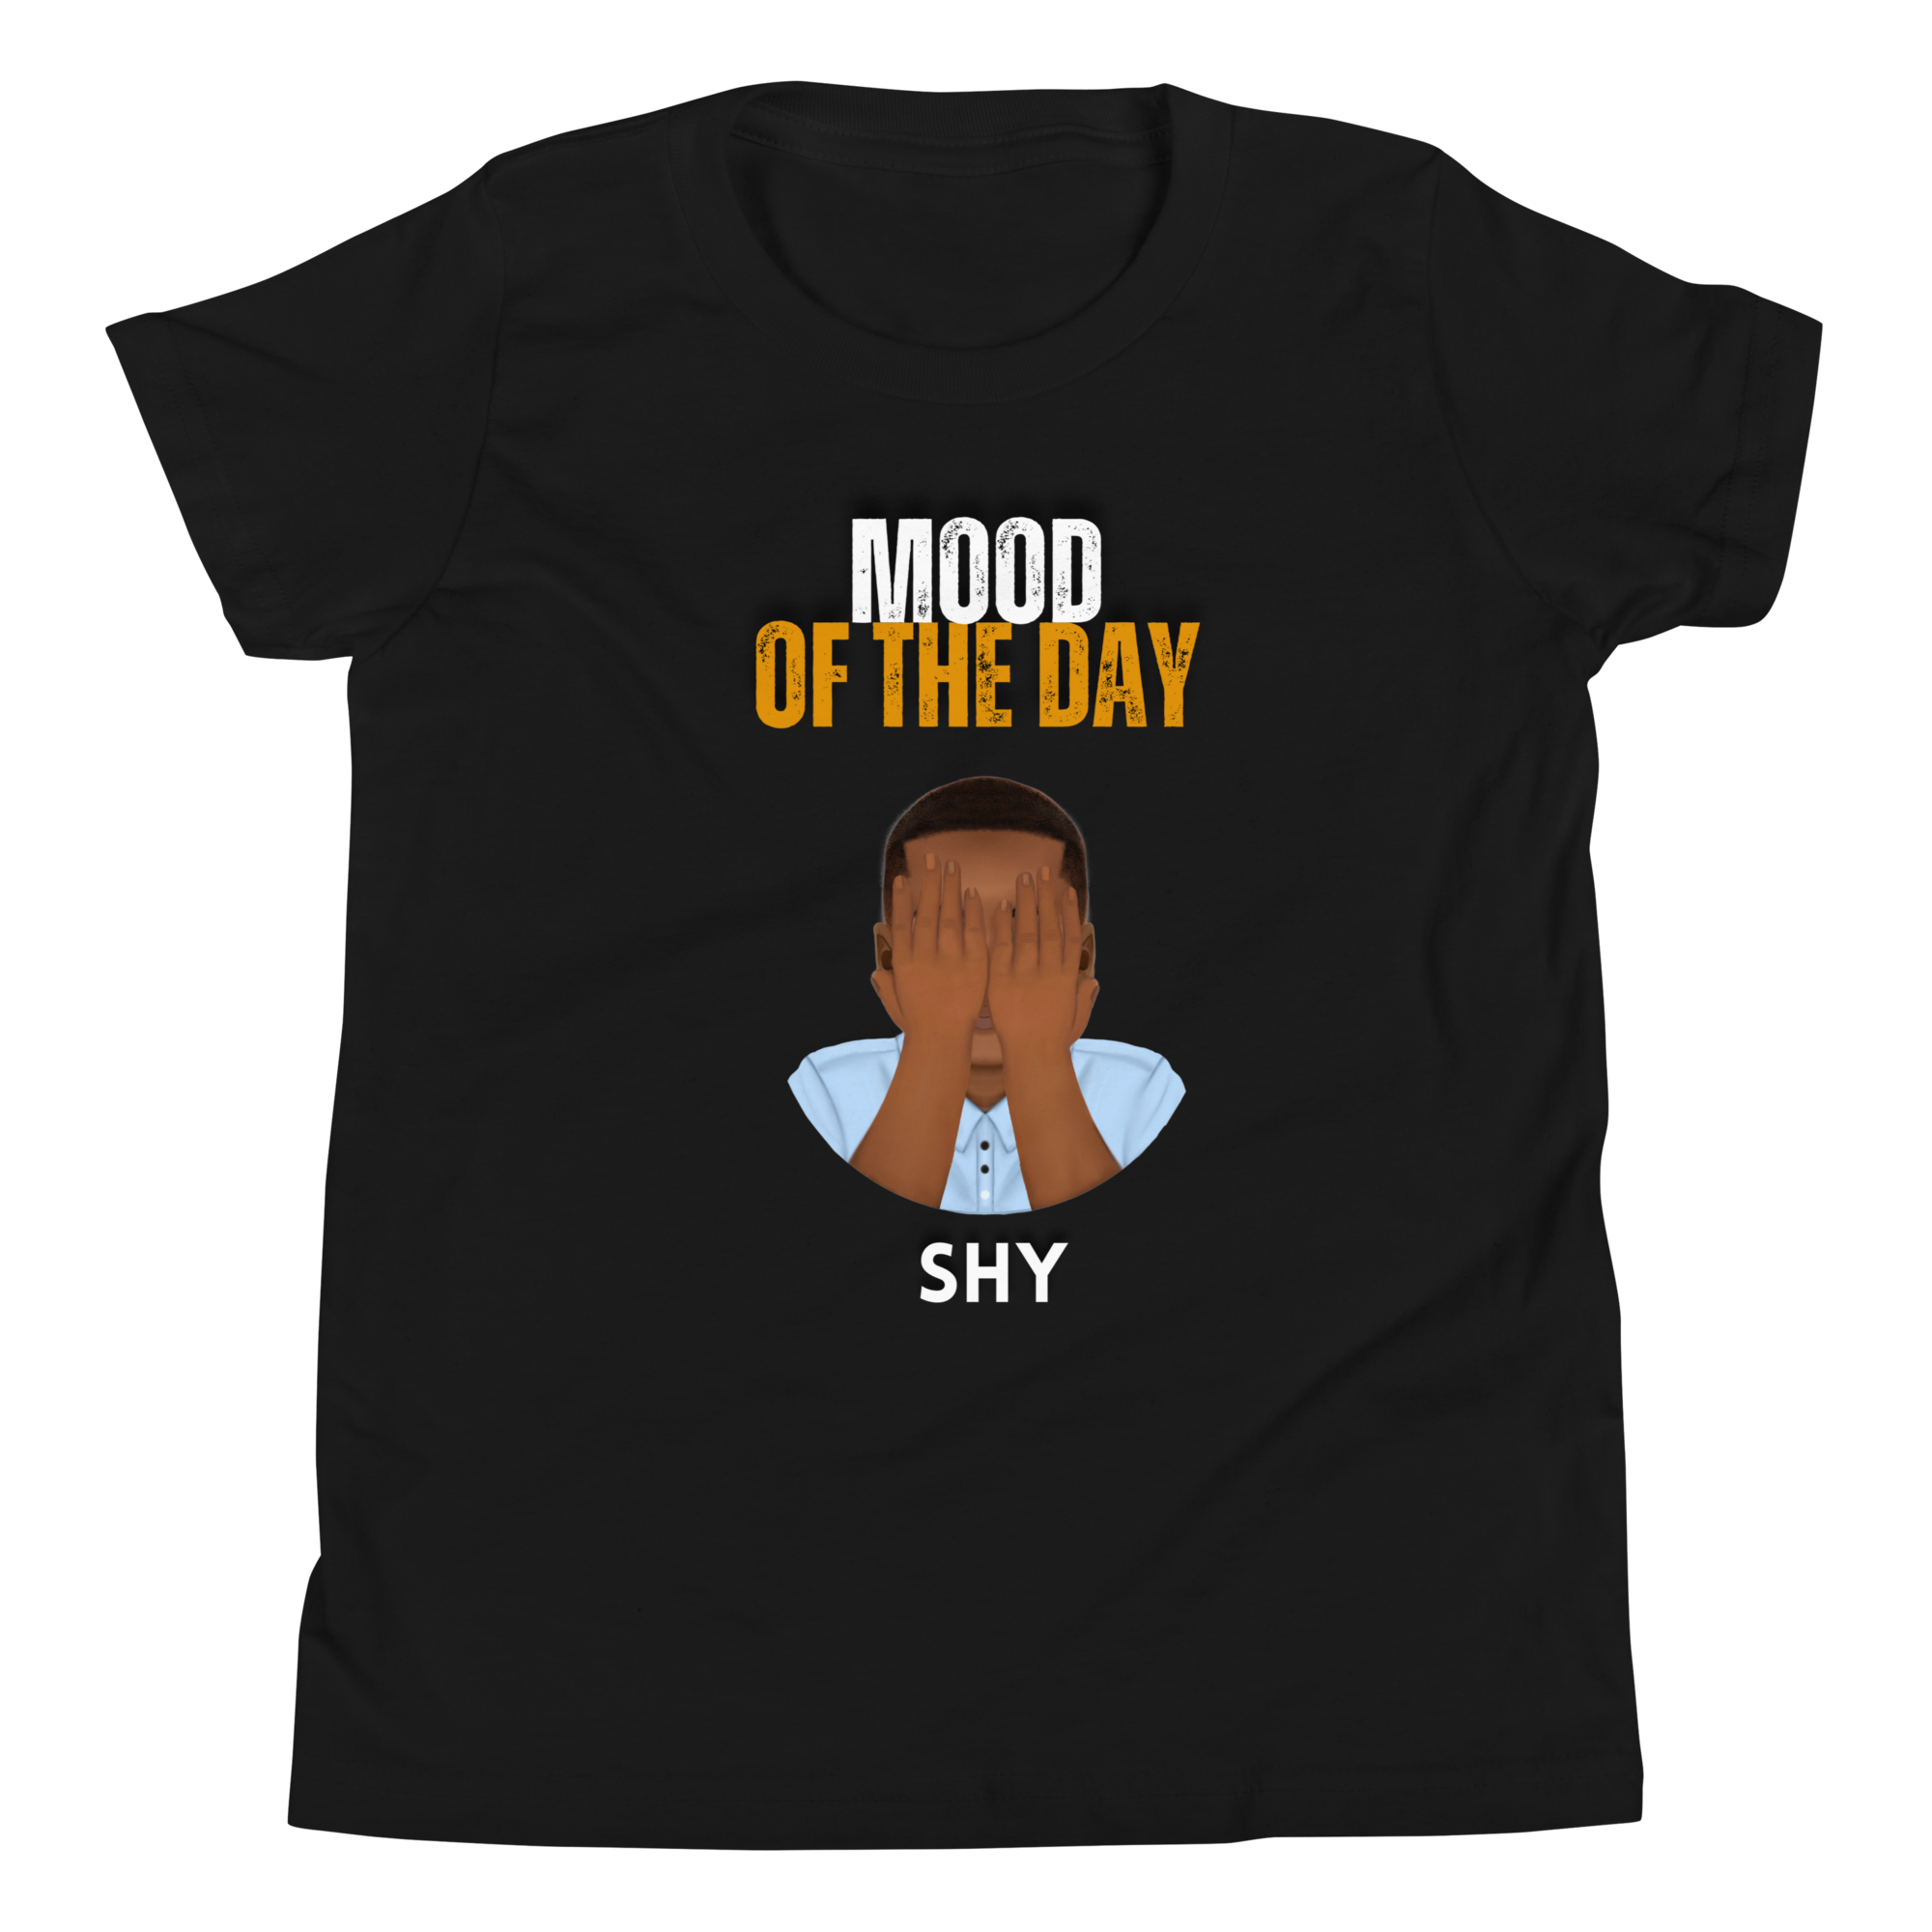 Youth Mood of the Day T-shirt - Shy Boy